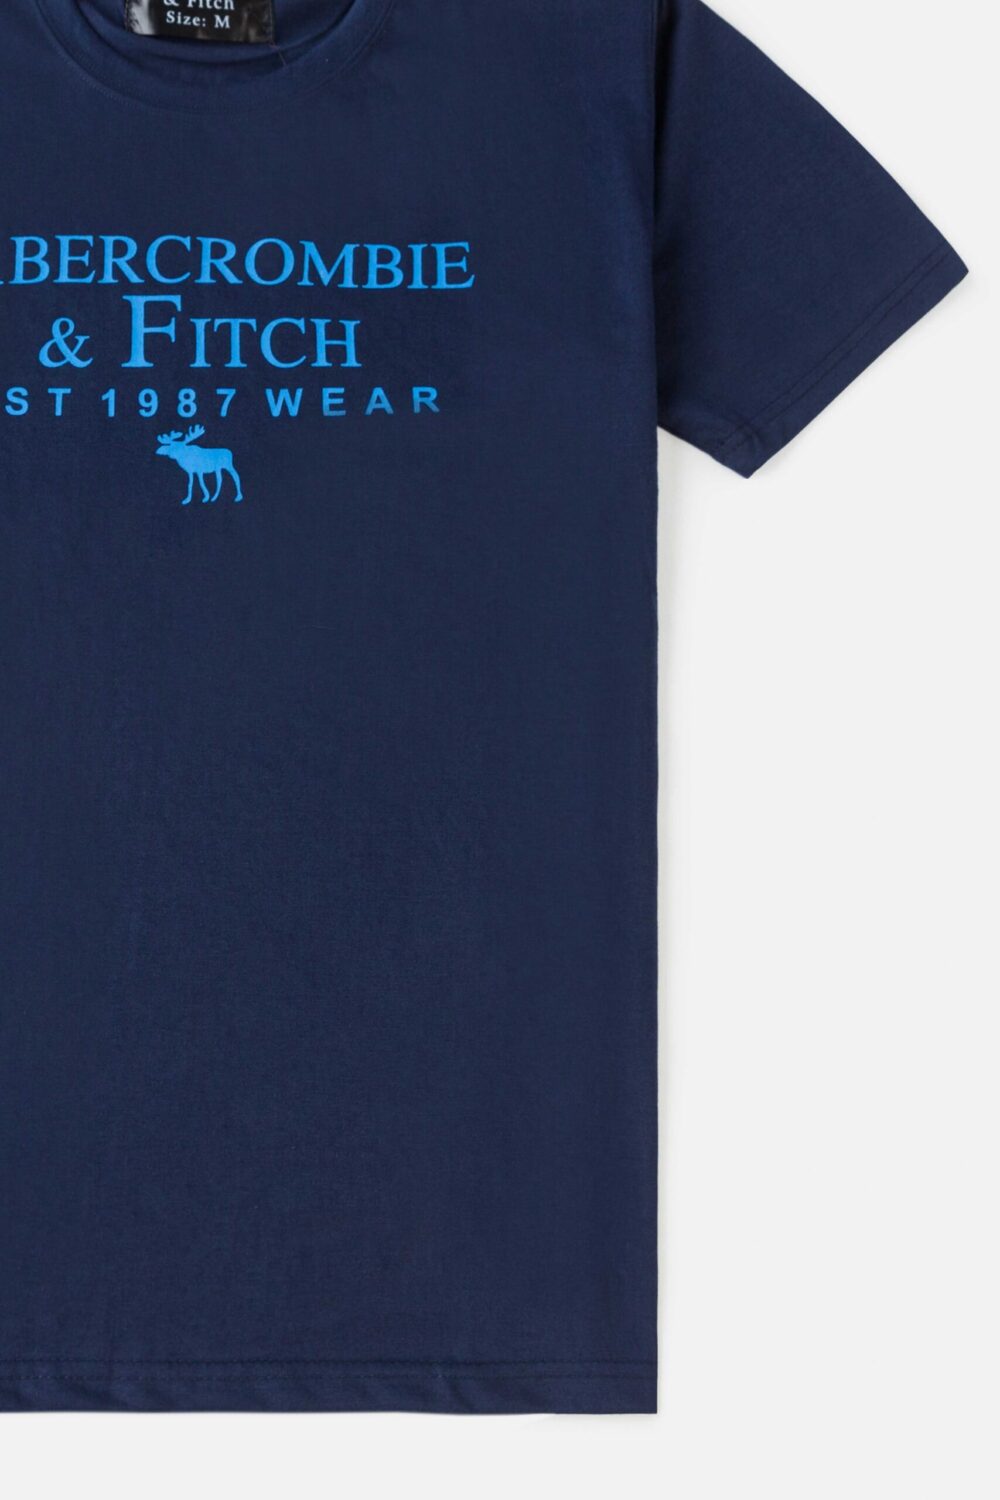 Abercrombie & Fitch Basic T Shirt – Navy Blue